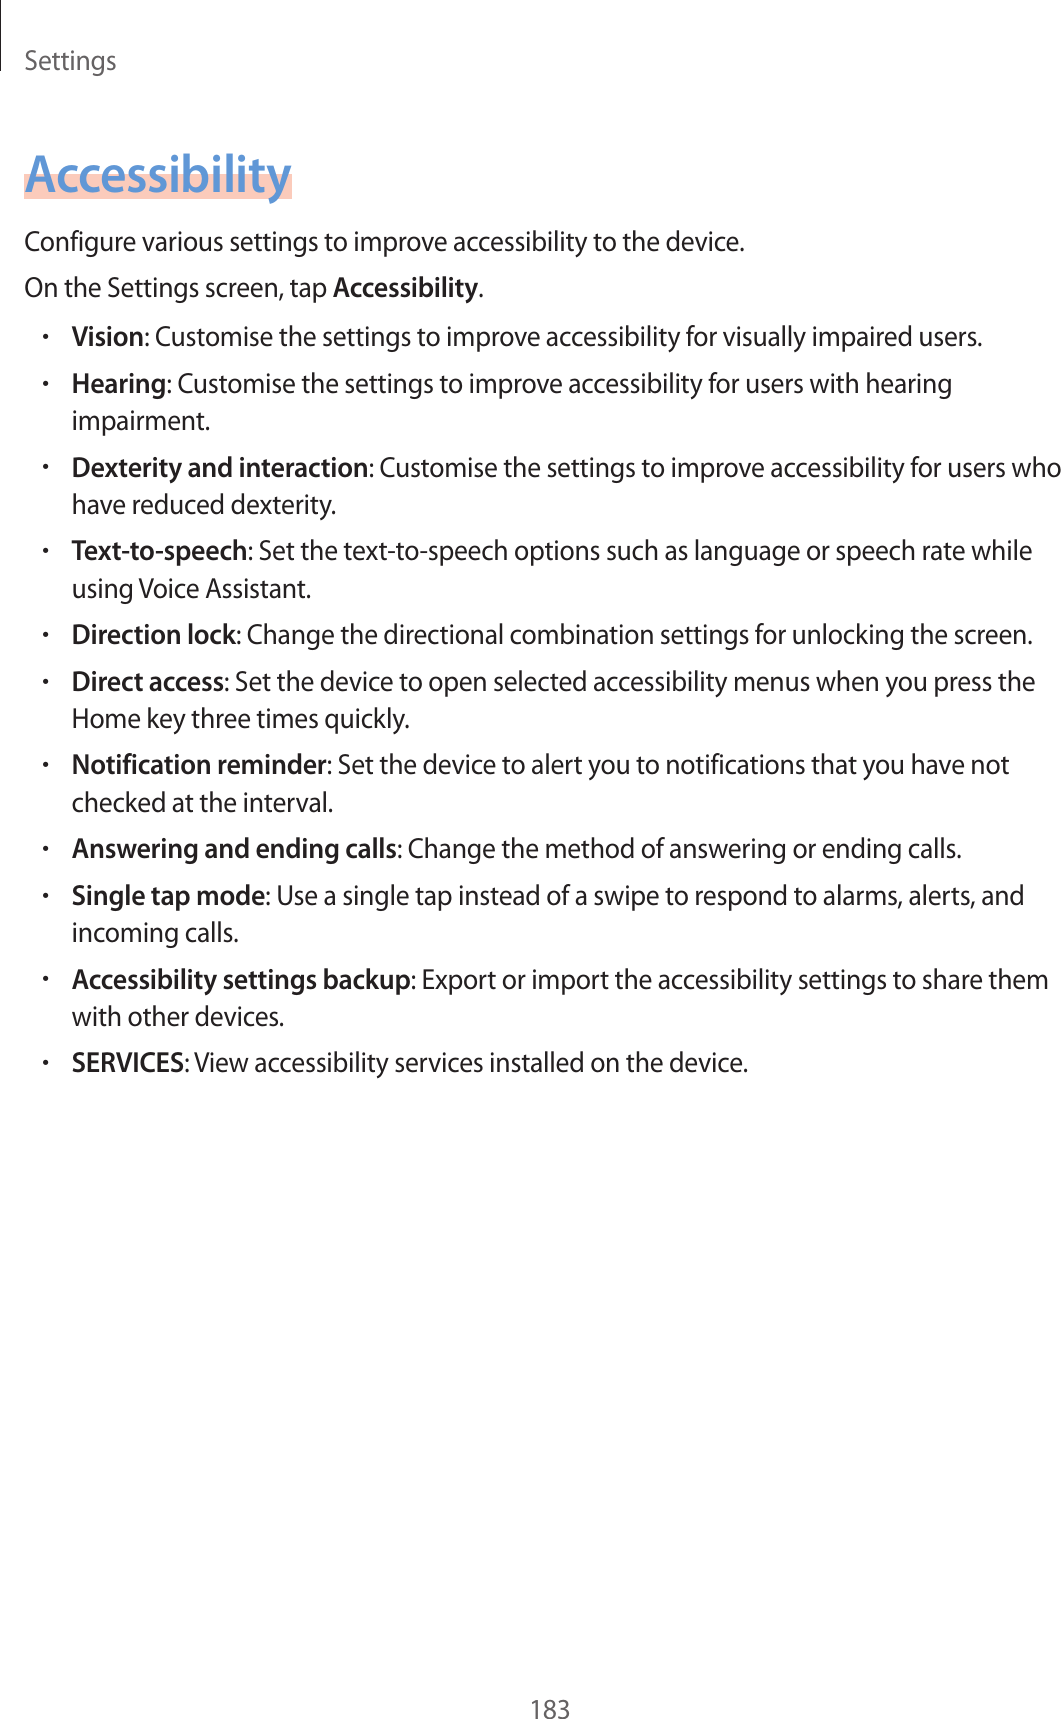 Settings183AccessibilityConfigure various settings to improve accessibility to the device.On the Settings screen, tap Accessibility.•Vision: Customise the settings to improve accessibility for visually impaired users.•Hearing: Customise the settings to improve accessibility for users with hearing impairment.•Dexterity and interaction: Customise the settings to improve accessibility for users who have reduced dexterity.•Text-to-speech: Set the text-to-speech options such as language or speech rate while using Voice Assistant.•Direction lock: Change the directional combination settings for unlocking the screen.•Direct access: Set the device to open selected accessibility menus when you press the Home key three times quickly.•Notification reminder: Set the device to alert you to notifications that you have not checked at the interval.•Answering and ending calls: Change the method of answering or ending calls.•Single tap mode: Use a single tap instead of a swipe to respond to alarms, alerts, and incoming calls.•Accessibility settings backup: Export or import the accessibility settings to share them with other devices.•SERVICES: View accessibility services installed on the device.